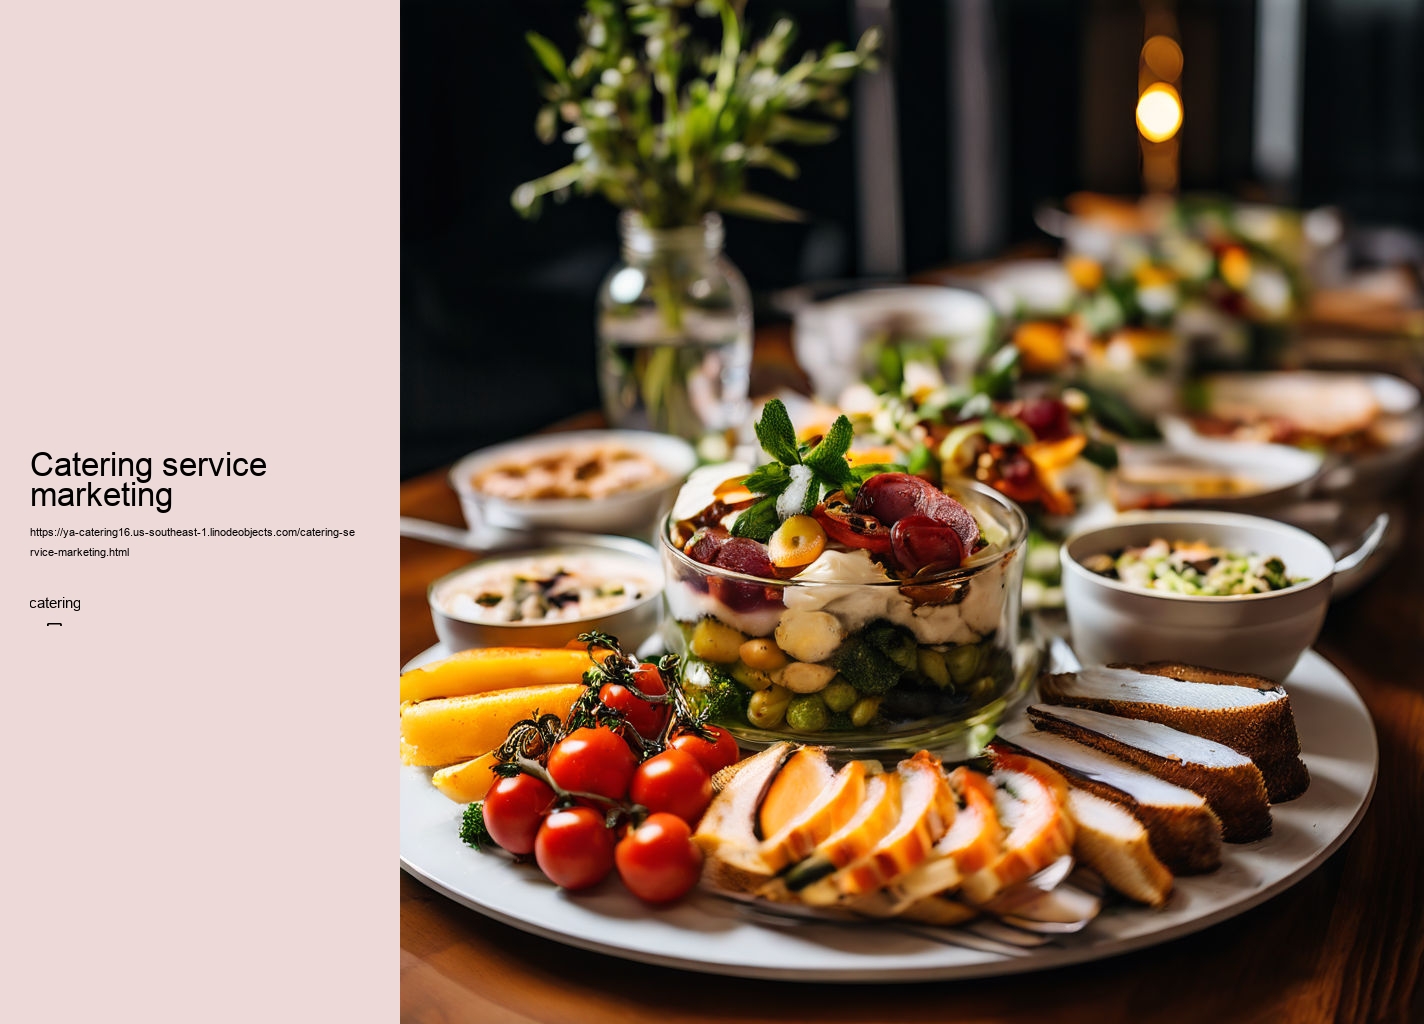 Catering service marketing